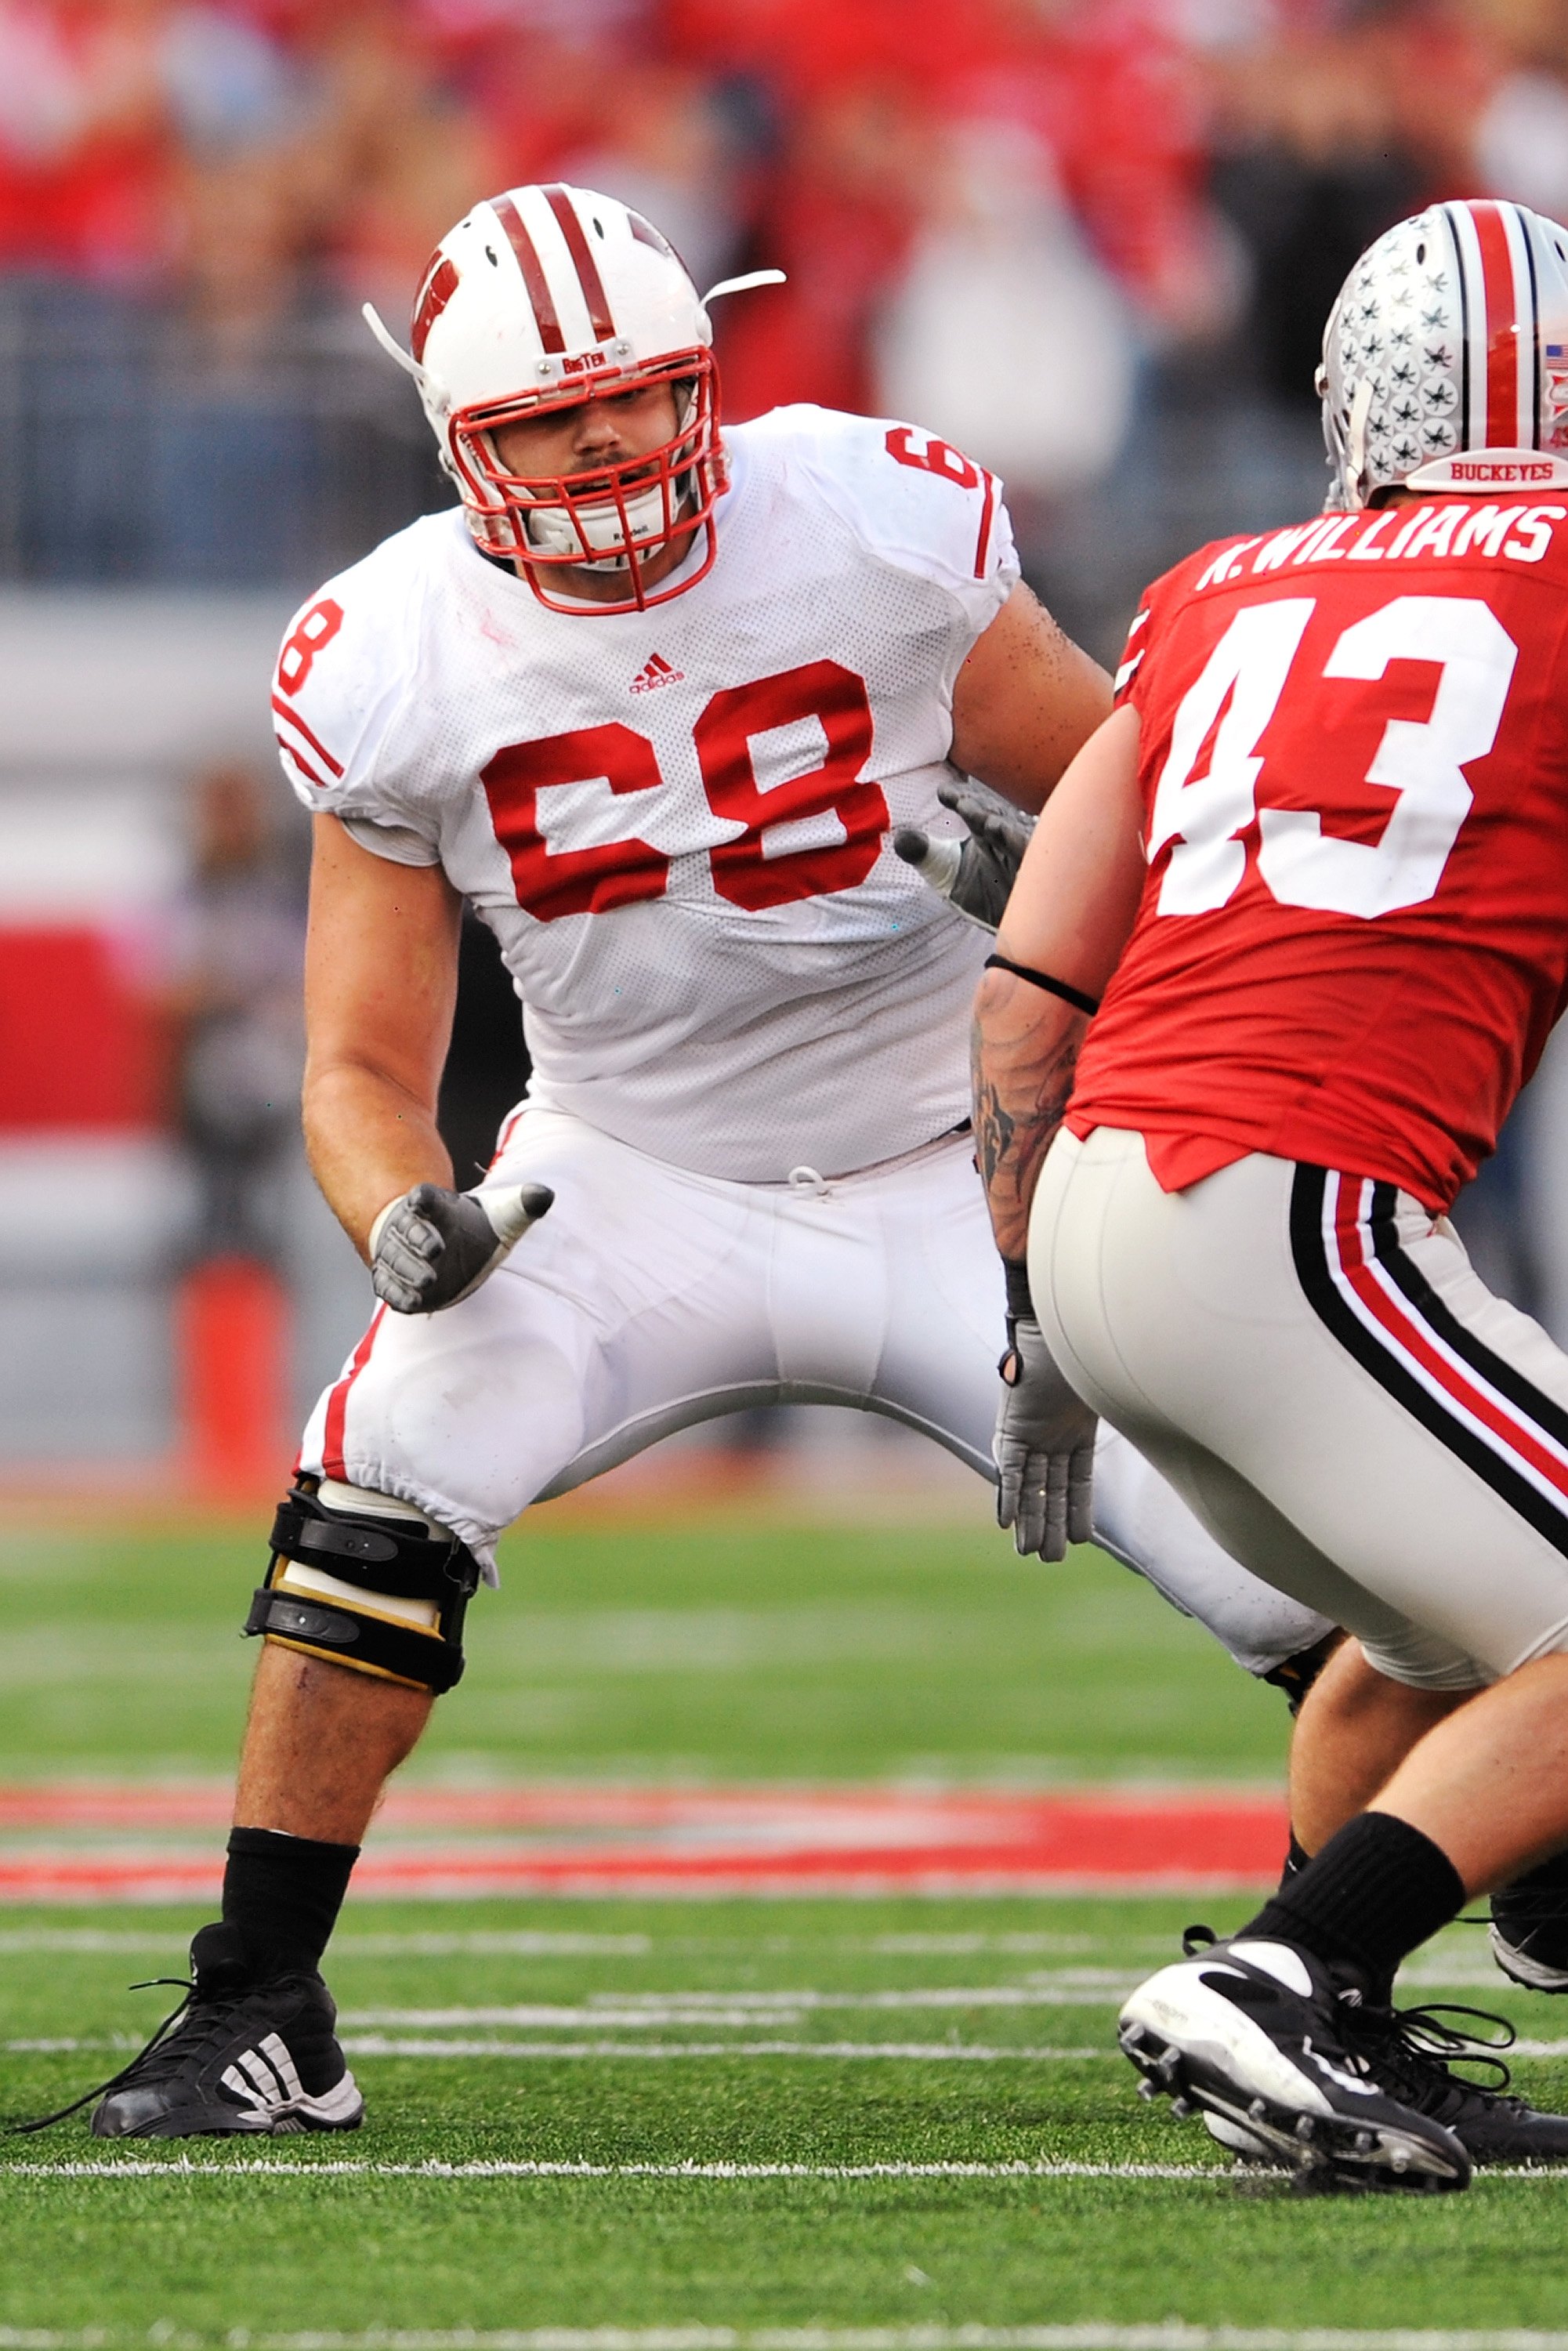 COLUMBUS, OH - OCTOBER 10:  Offensive lineman Gabe Carimi #68 of the Wisconsin Badgers blocks against the Ohio State Buckeyes at Ohio Stadium on October 10, 2009 in Columbus, Ohio.  (Photo by Jamie Sabau/Getty Images)